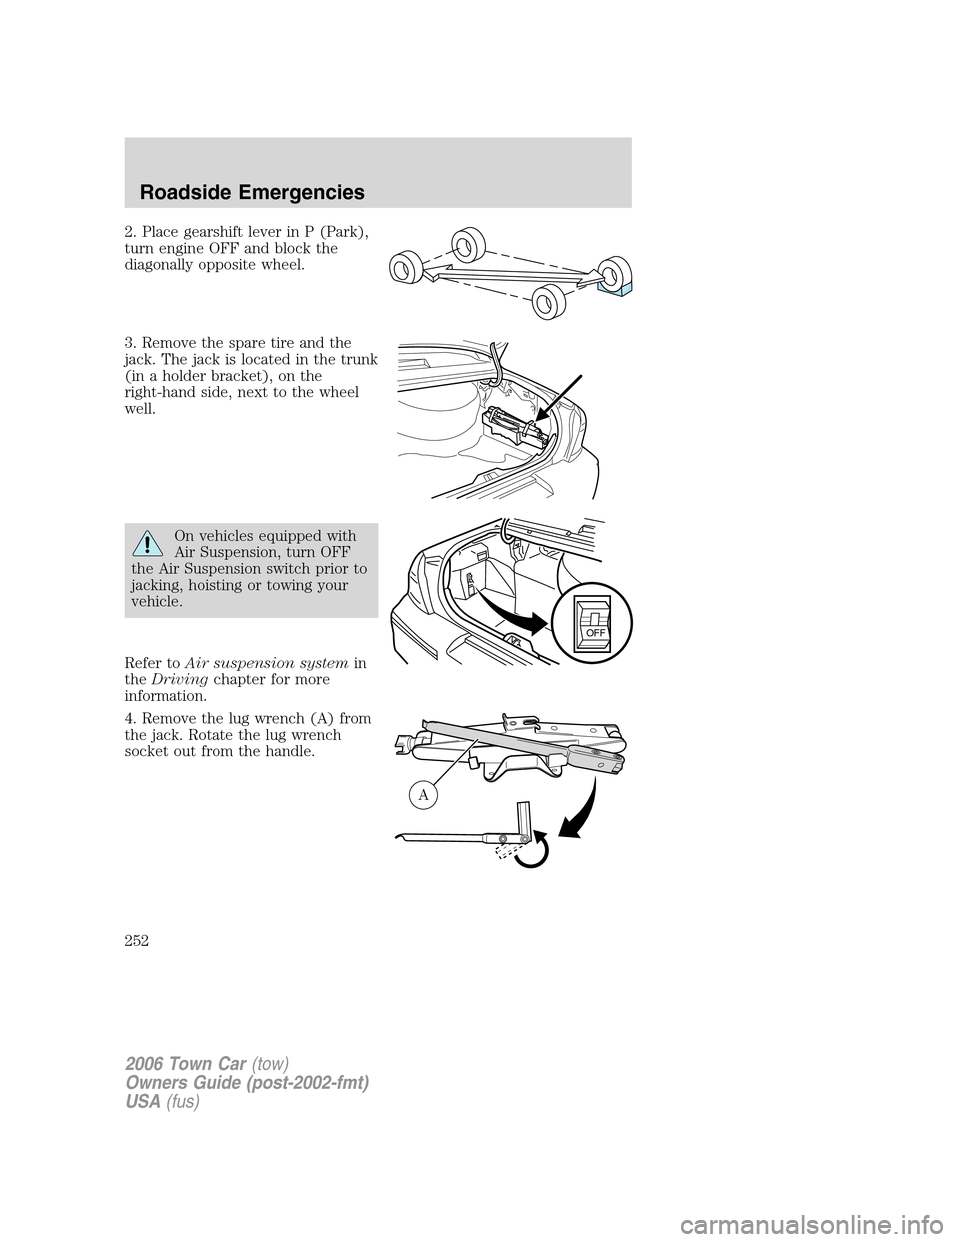 LINCOLN TOWN CAR 2006 User Guide 2. Place gearshift lever in P (Park),
turn engine OFF and block the
diagonally opposite wheel.
3. Remove the spare tire and the
jack. The jack is located in the trunk
(in a holder bracket), on the
rig